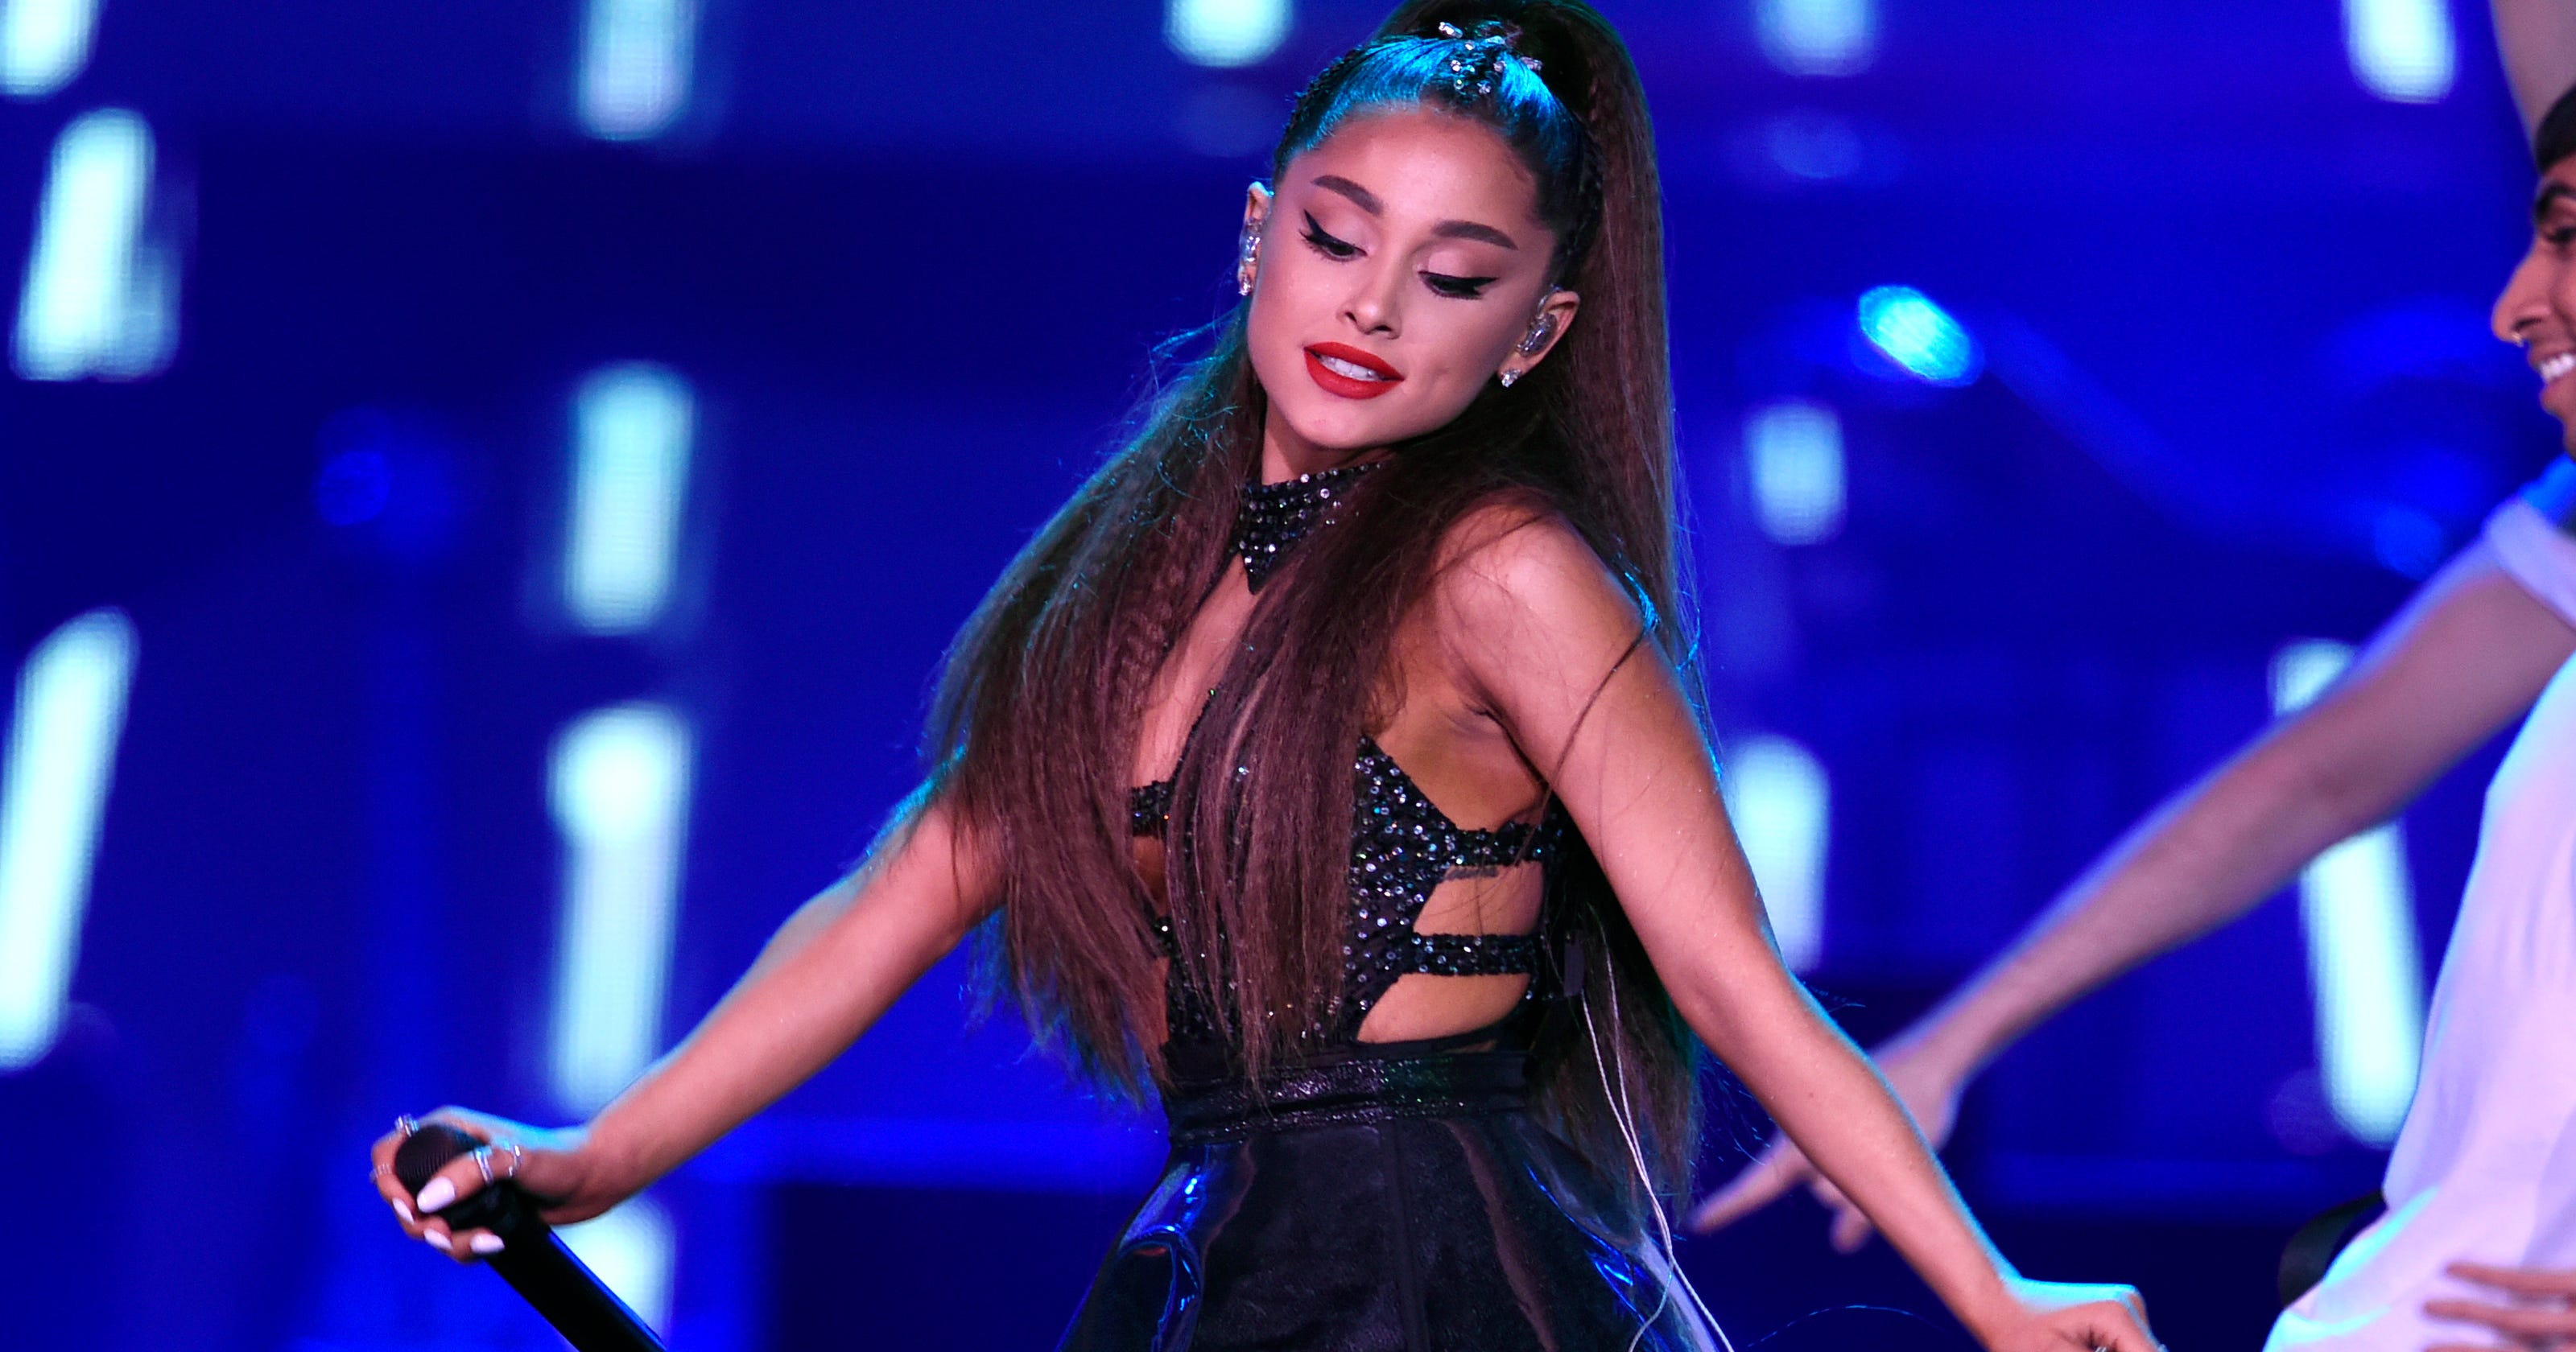 Ariana Grande Porn Captions Sex - Ariana Grande bisexual?' That question is problematic to ...